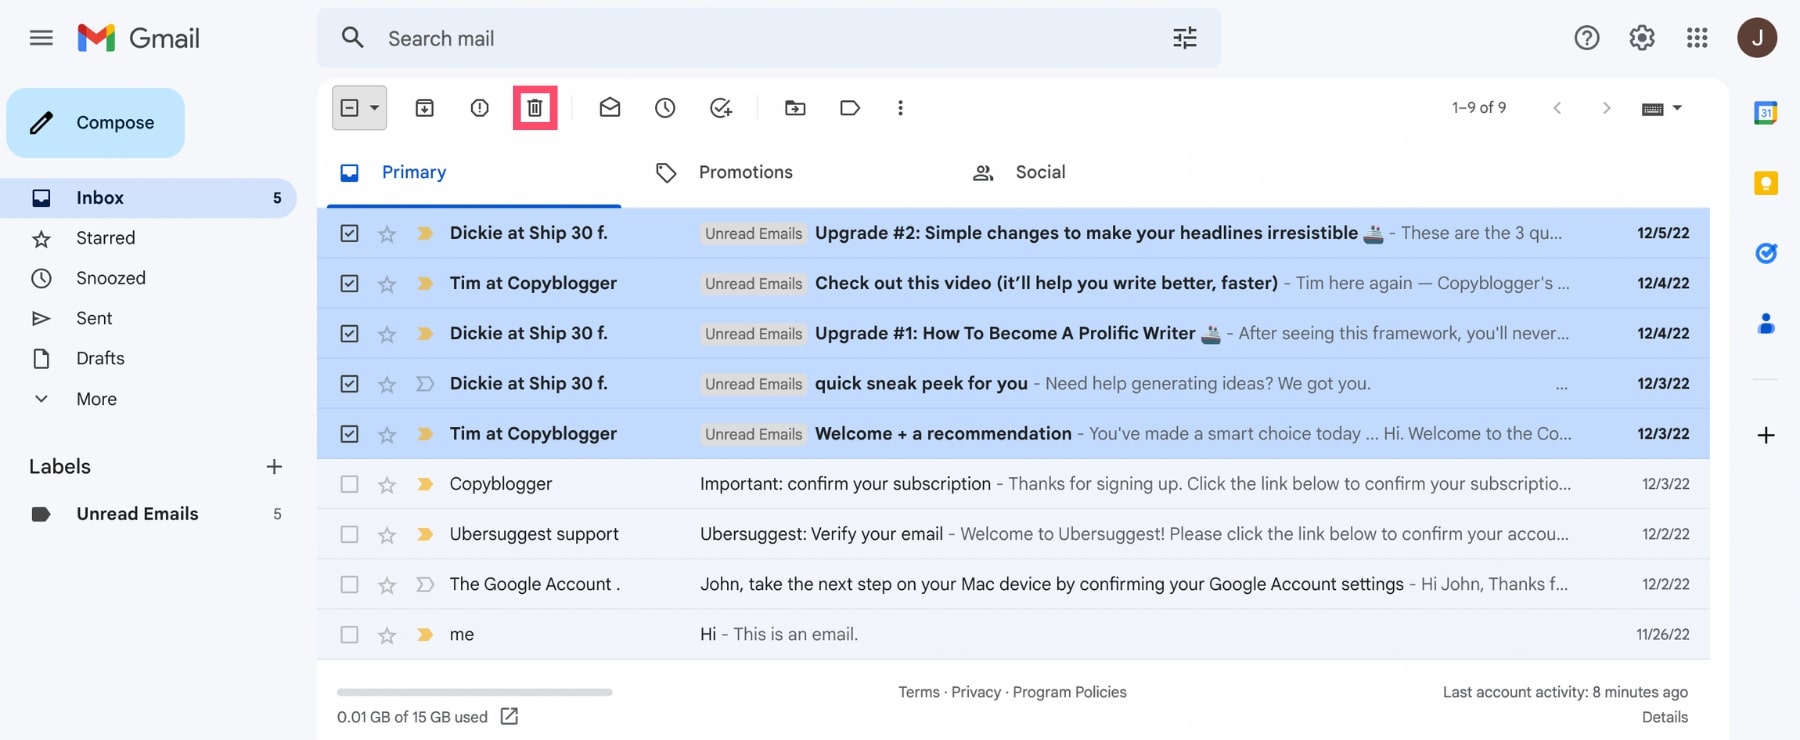 Delete multiple unread messages in Gmail